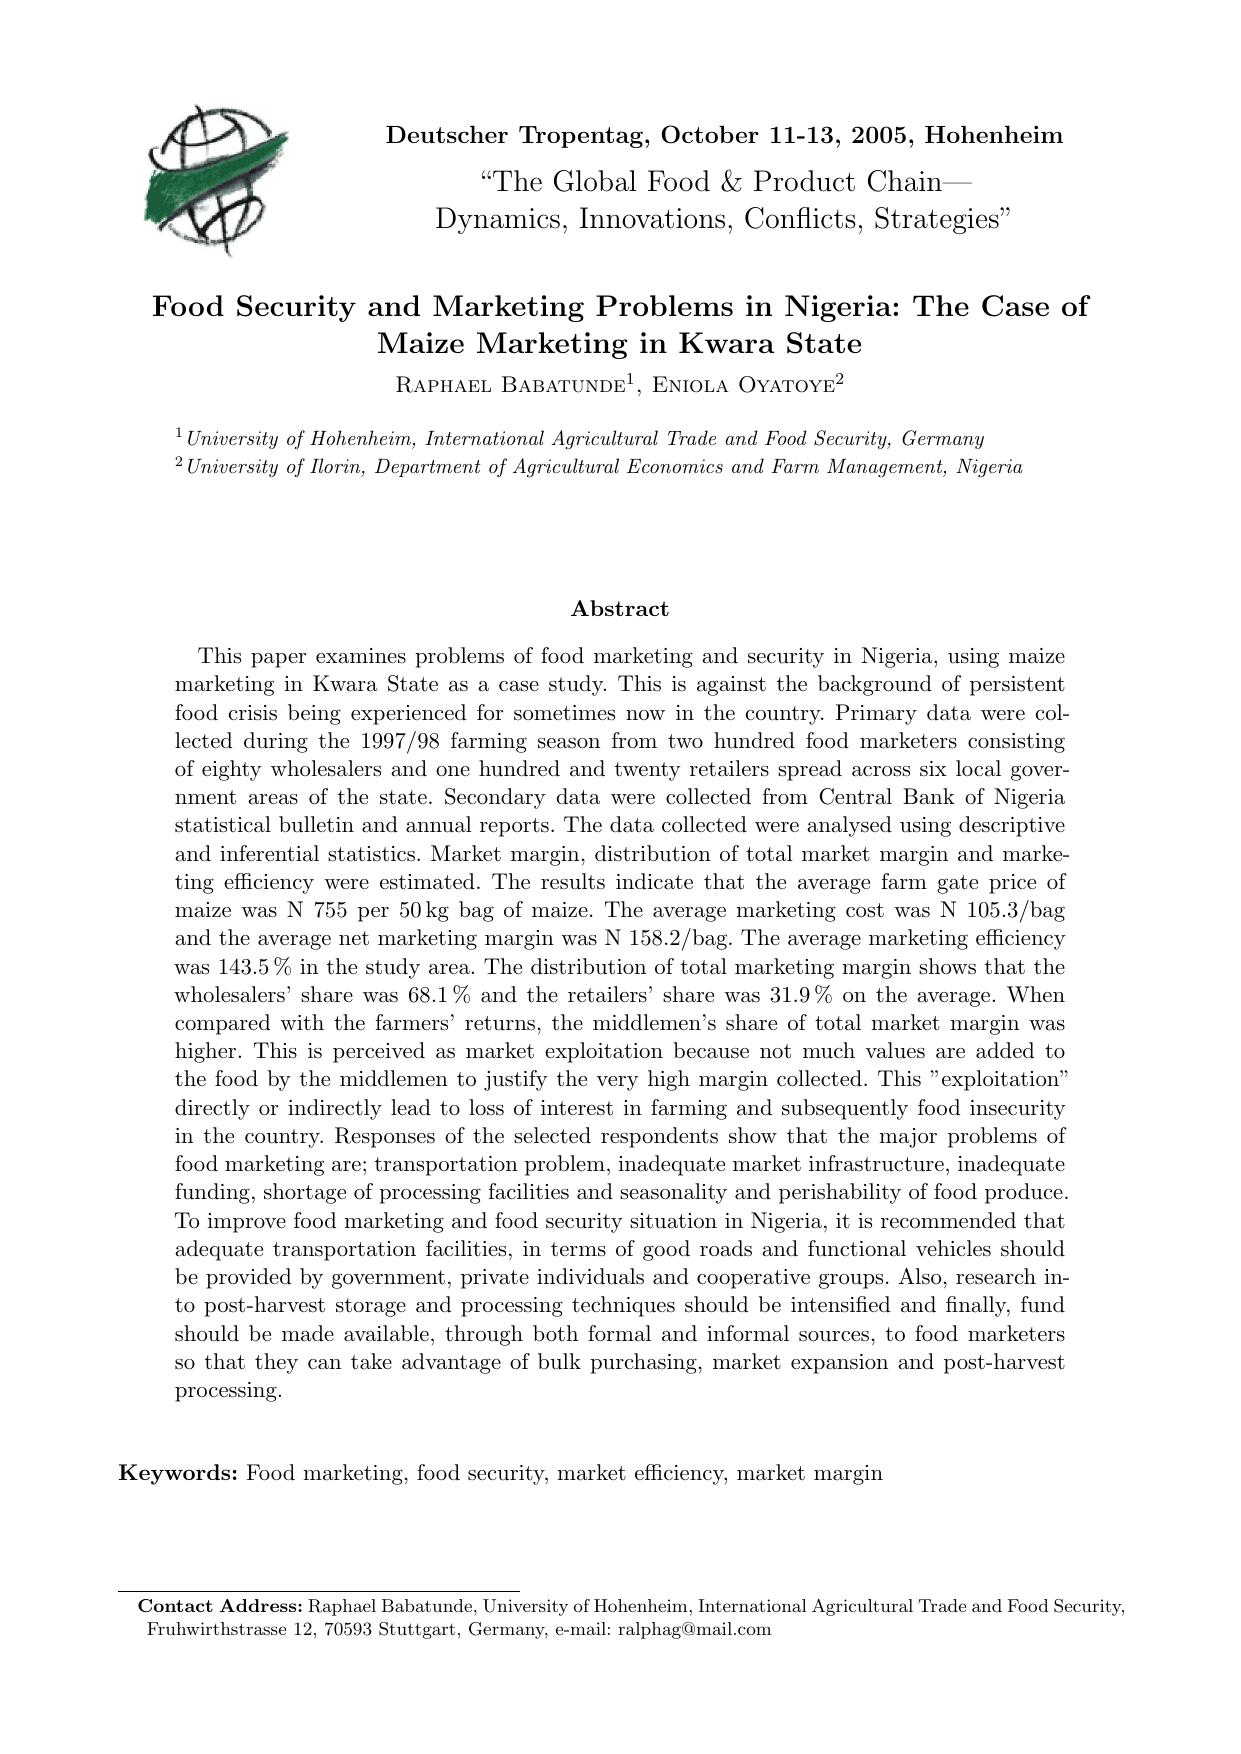 Food Security and Marketing Problems in Nigeria: The Case of Maize Marketing in Kwara State